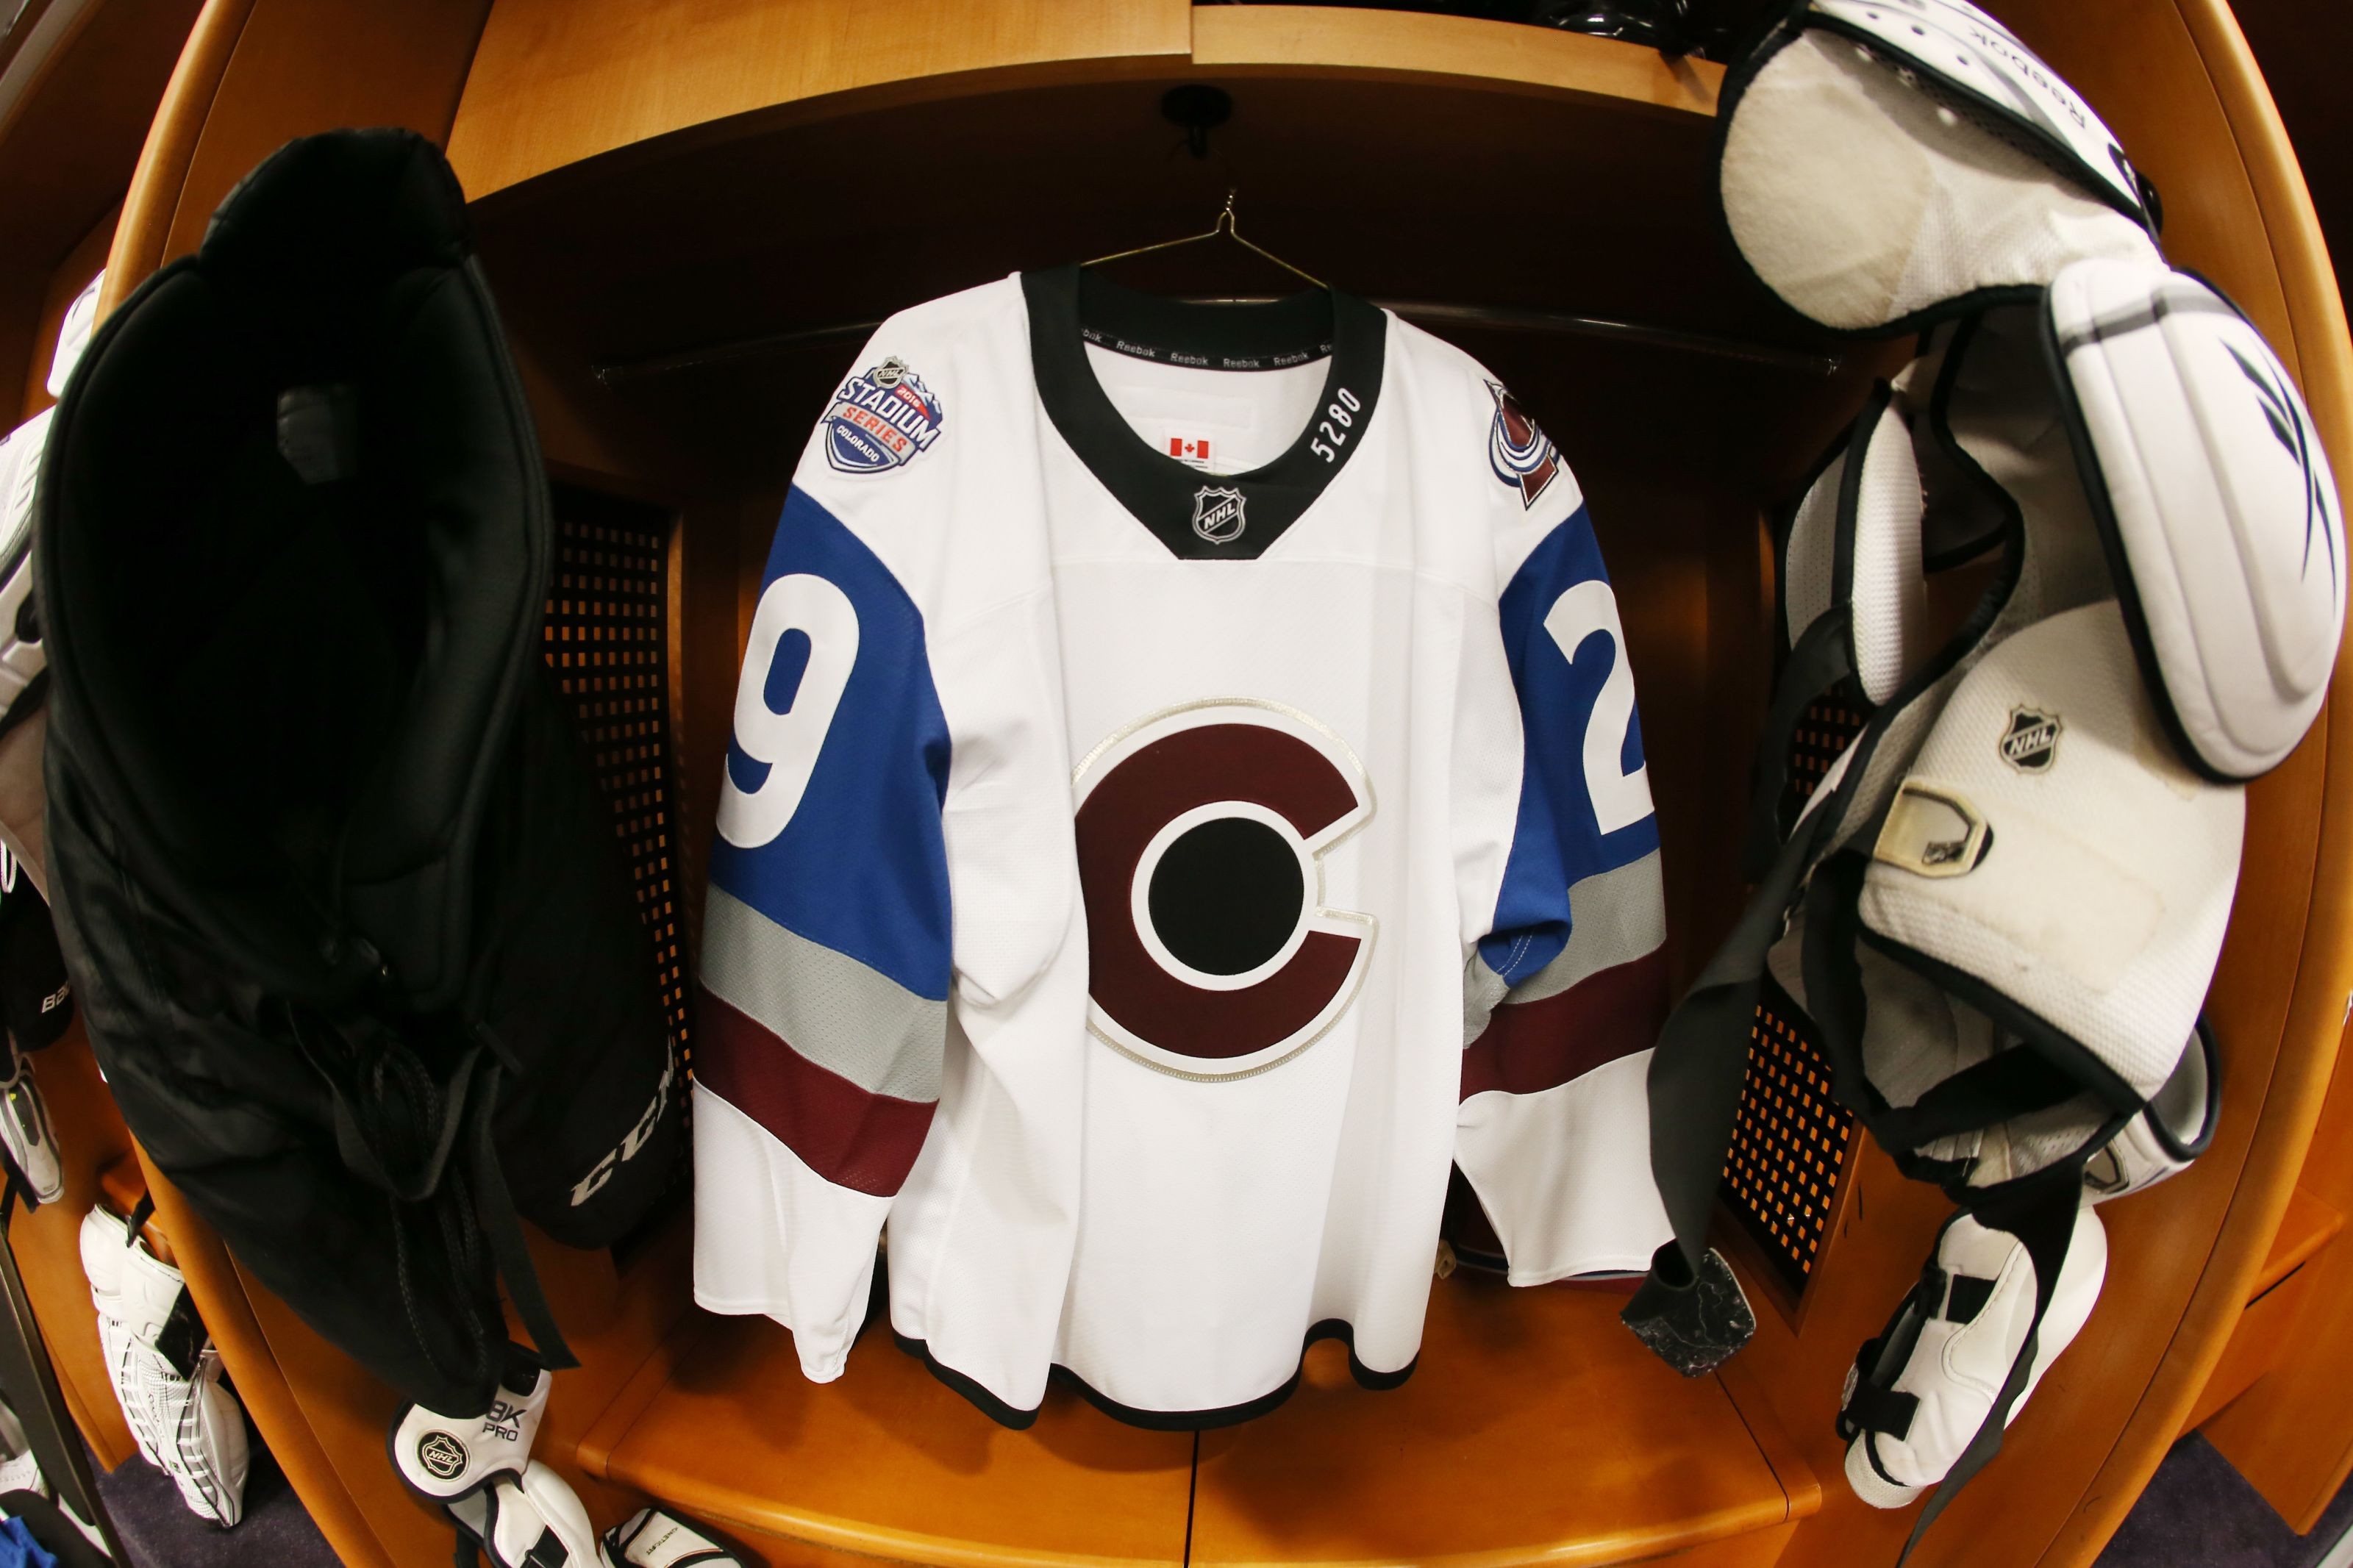 avalanche jerseys outdoor game